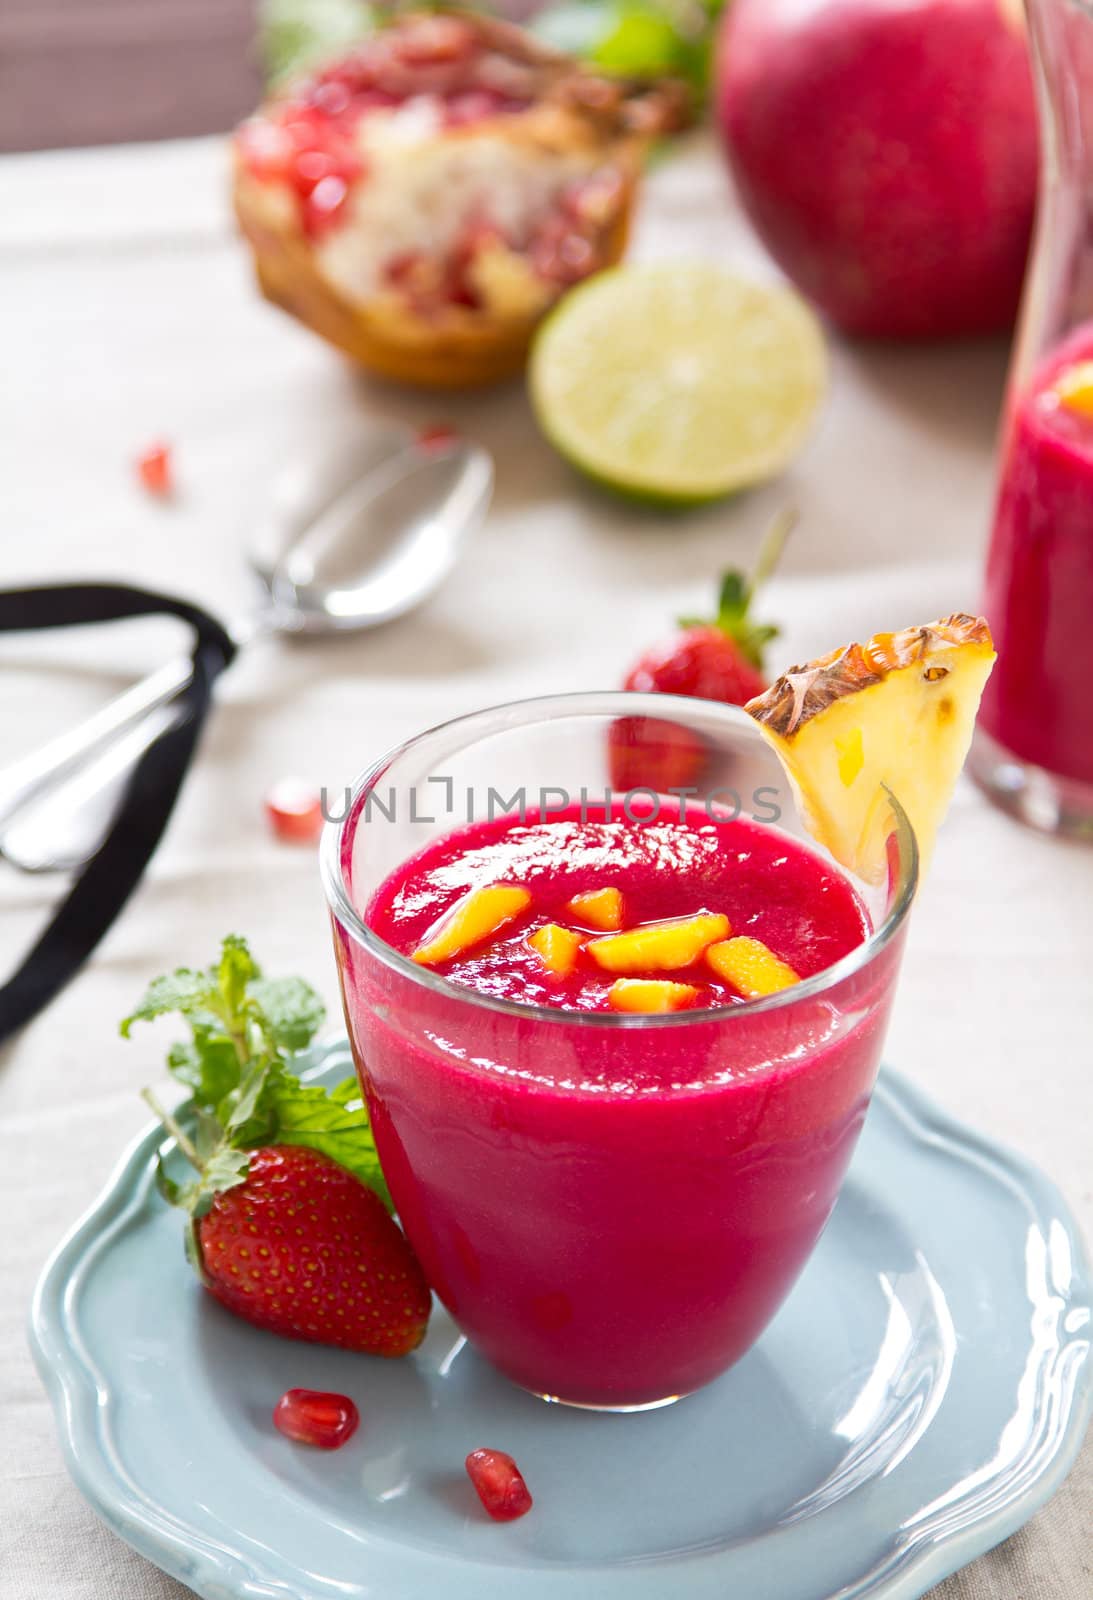 Beetroot,Mango and pomegranate smoothie by vanillaechoes